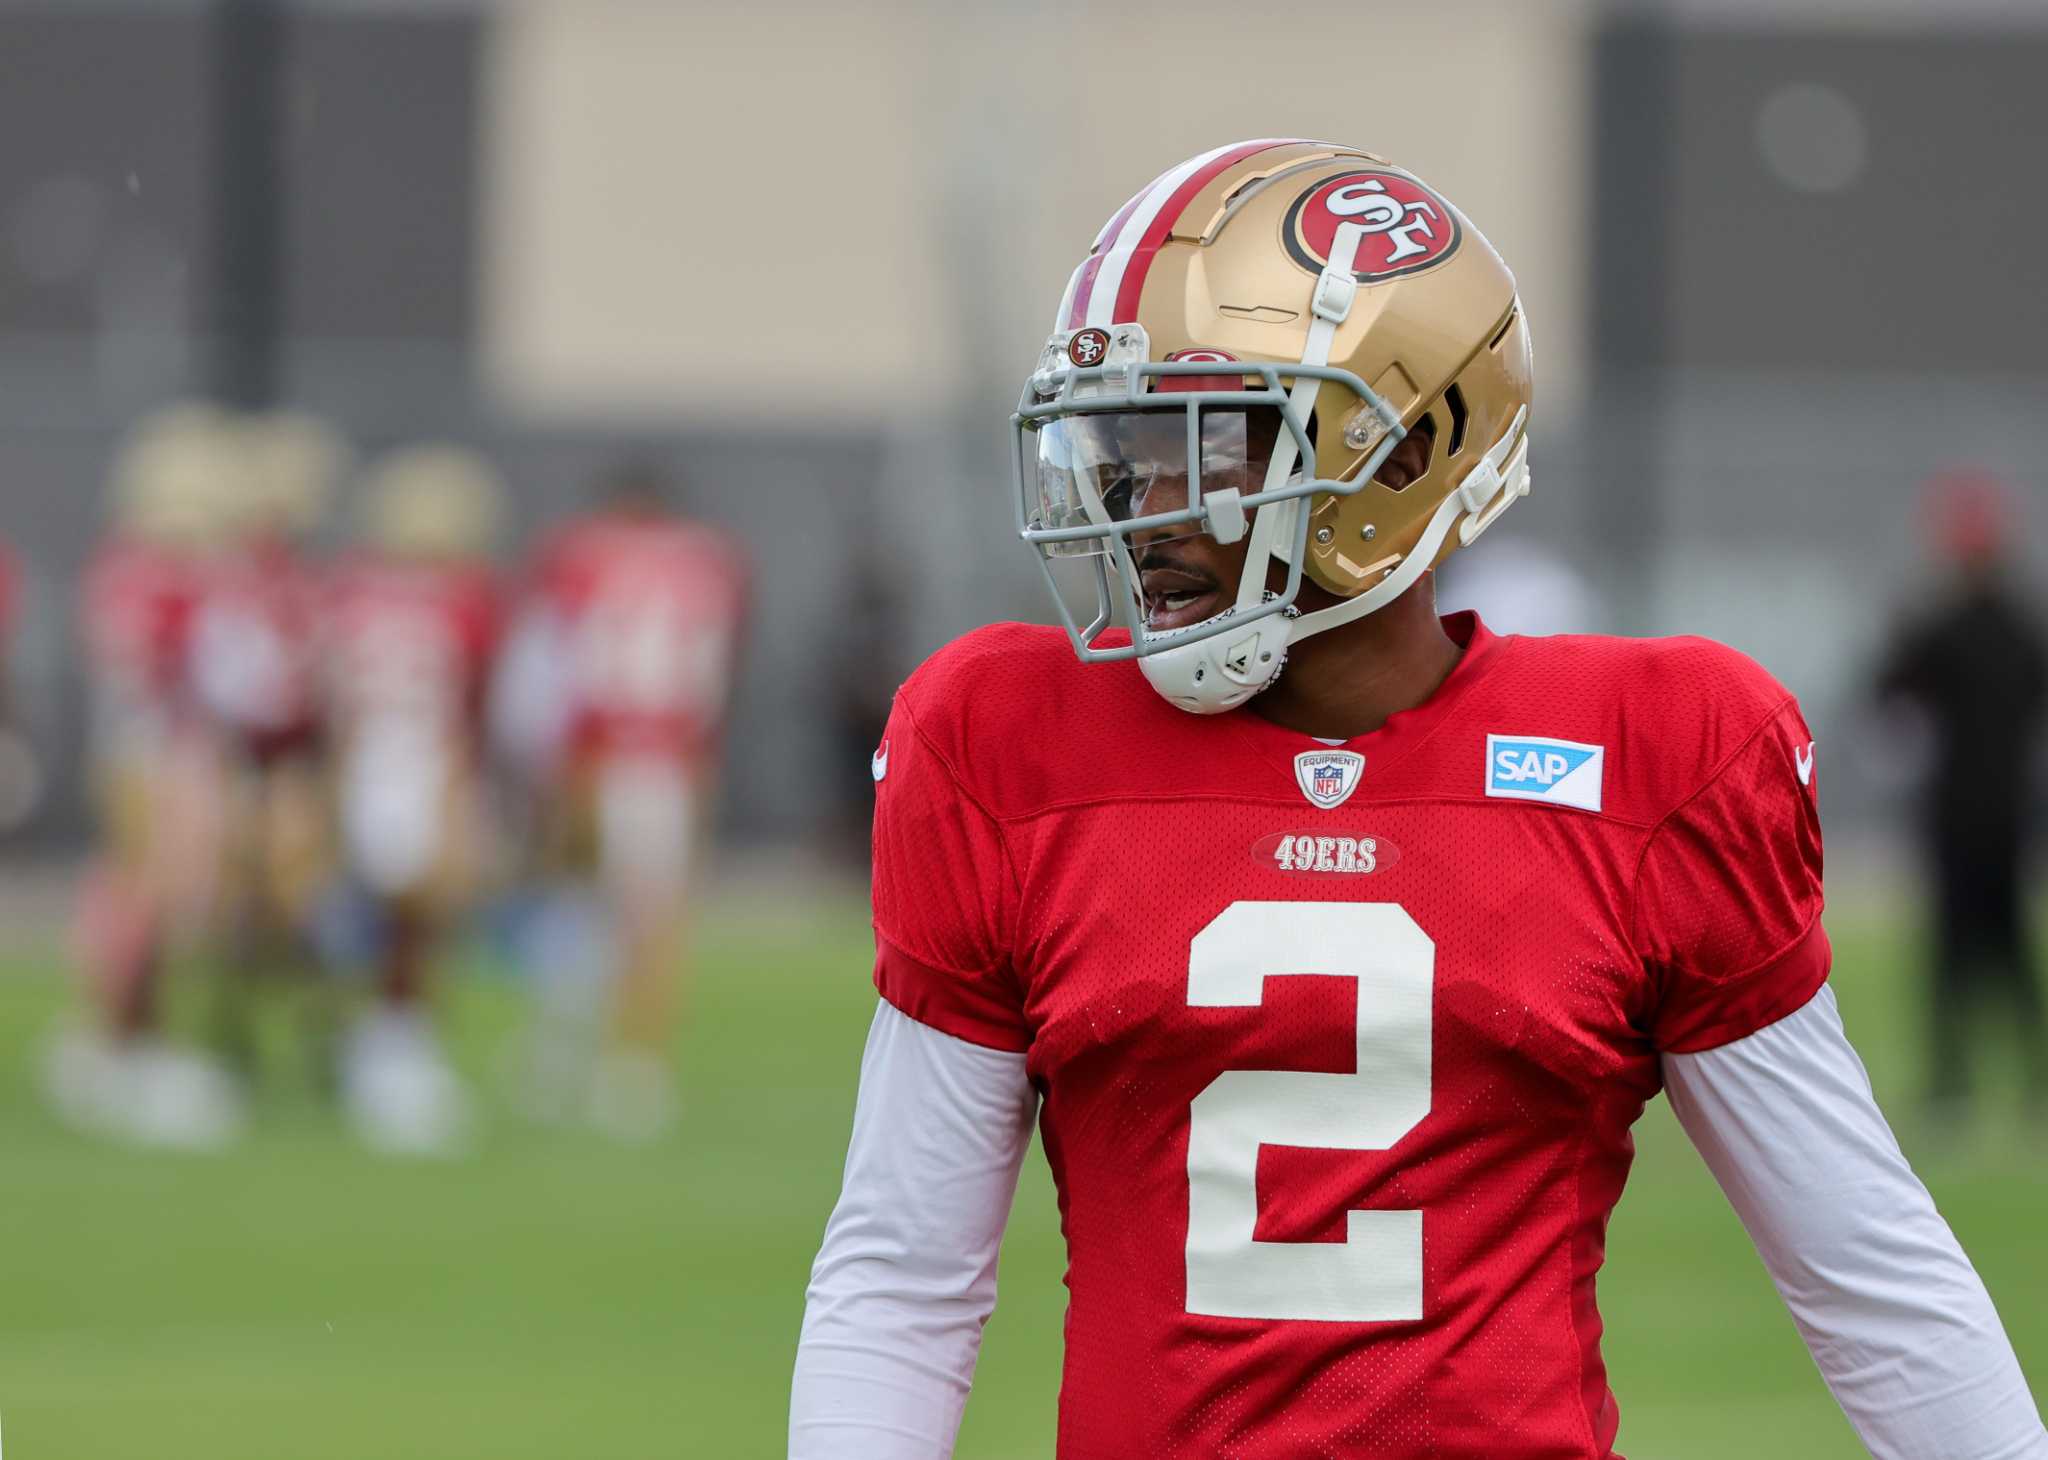 Deommodore Lenoir moves inside as 49ers shake up things in the slot